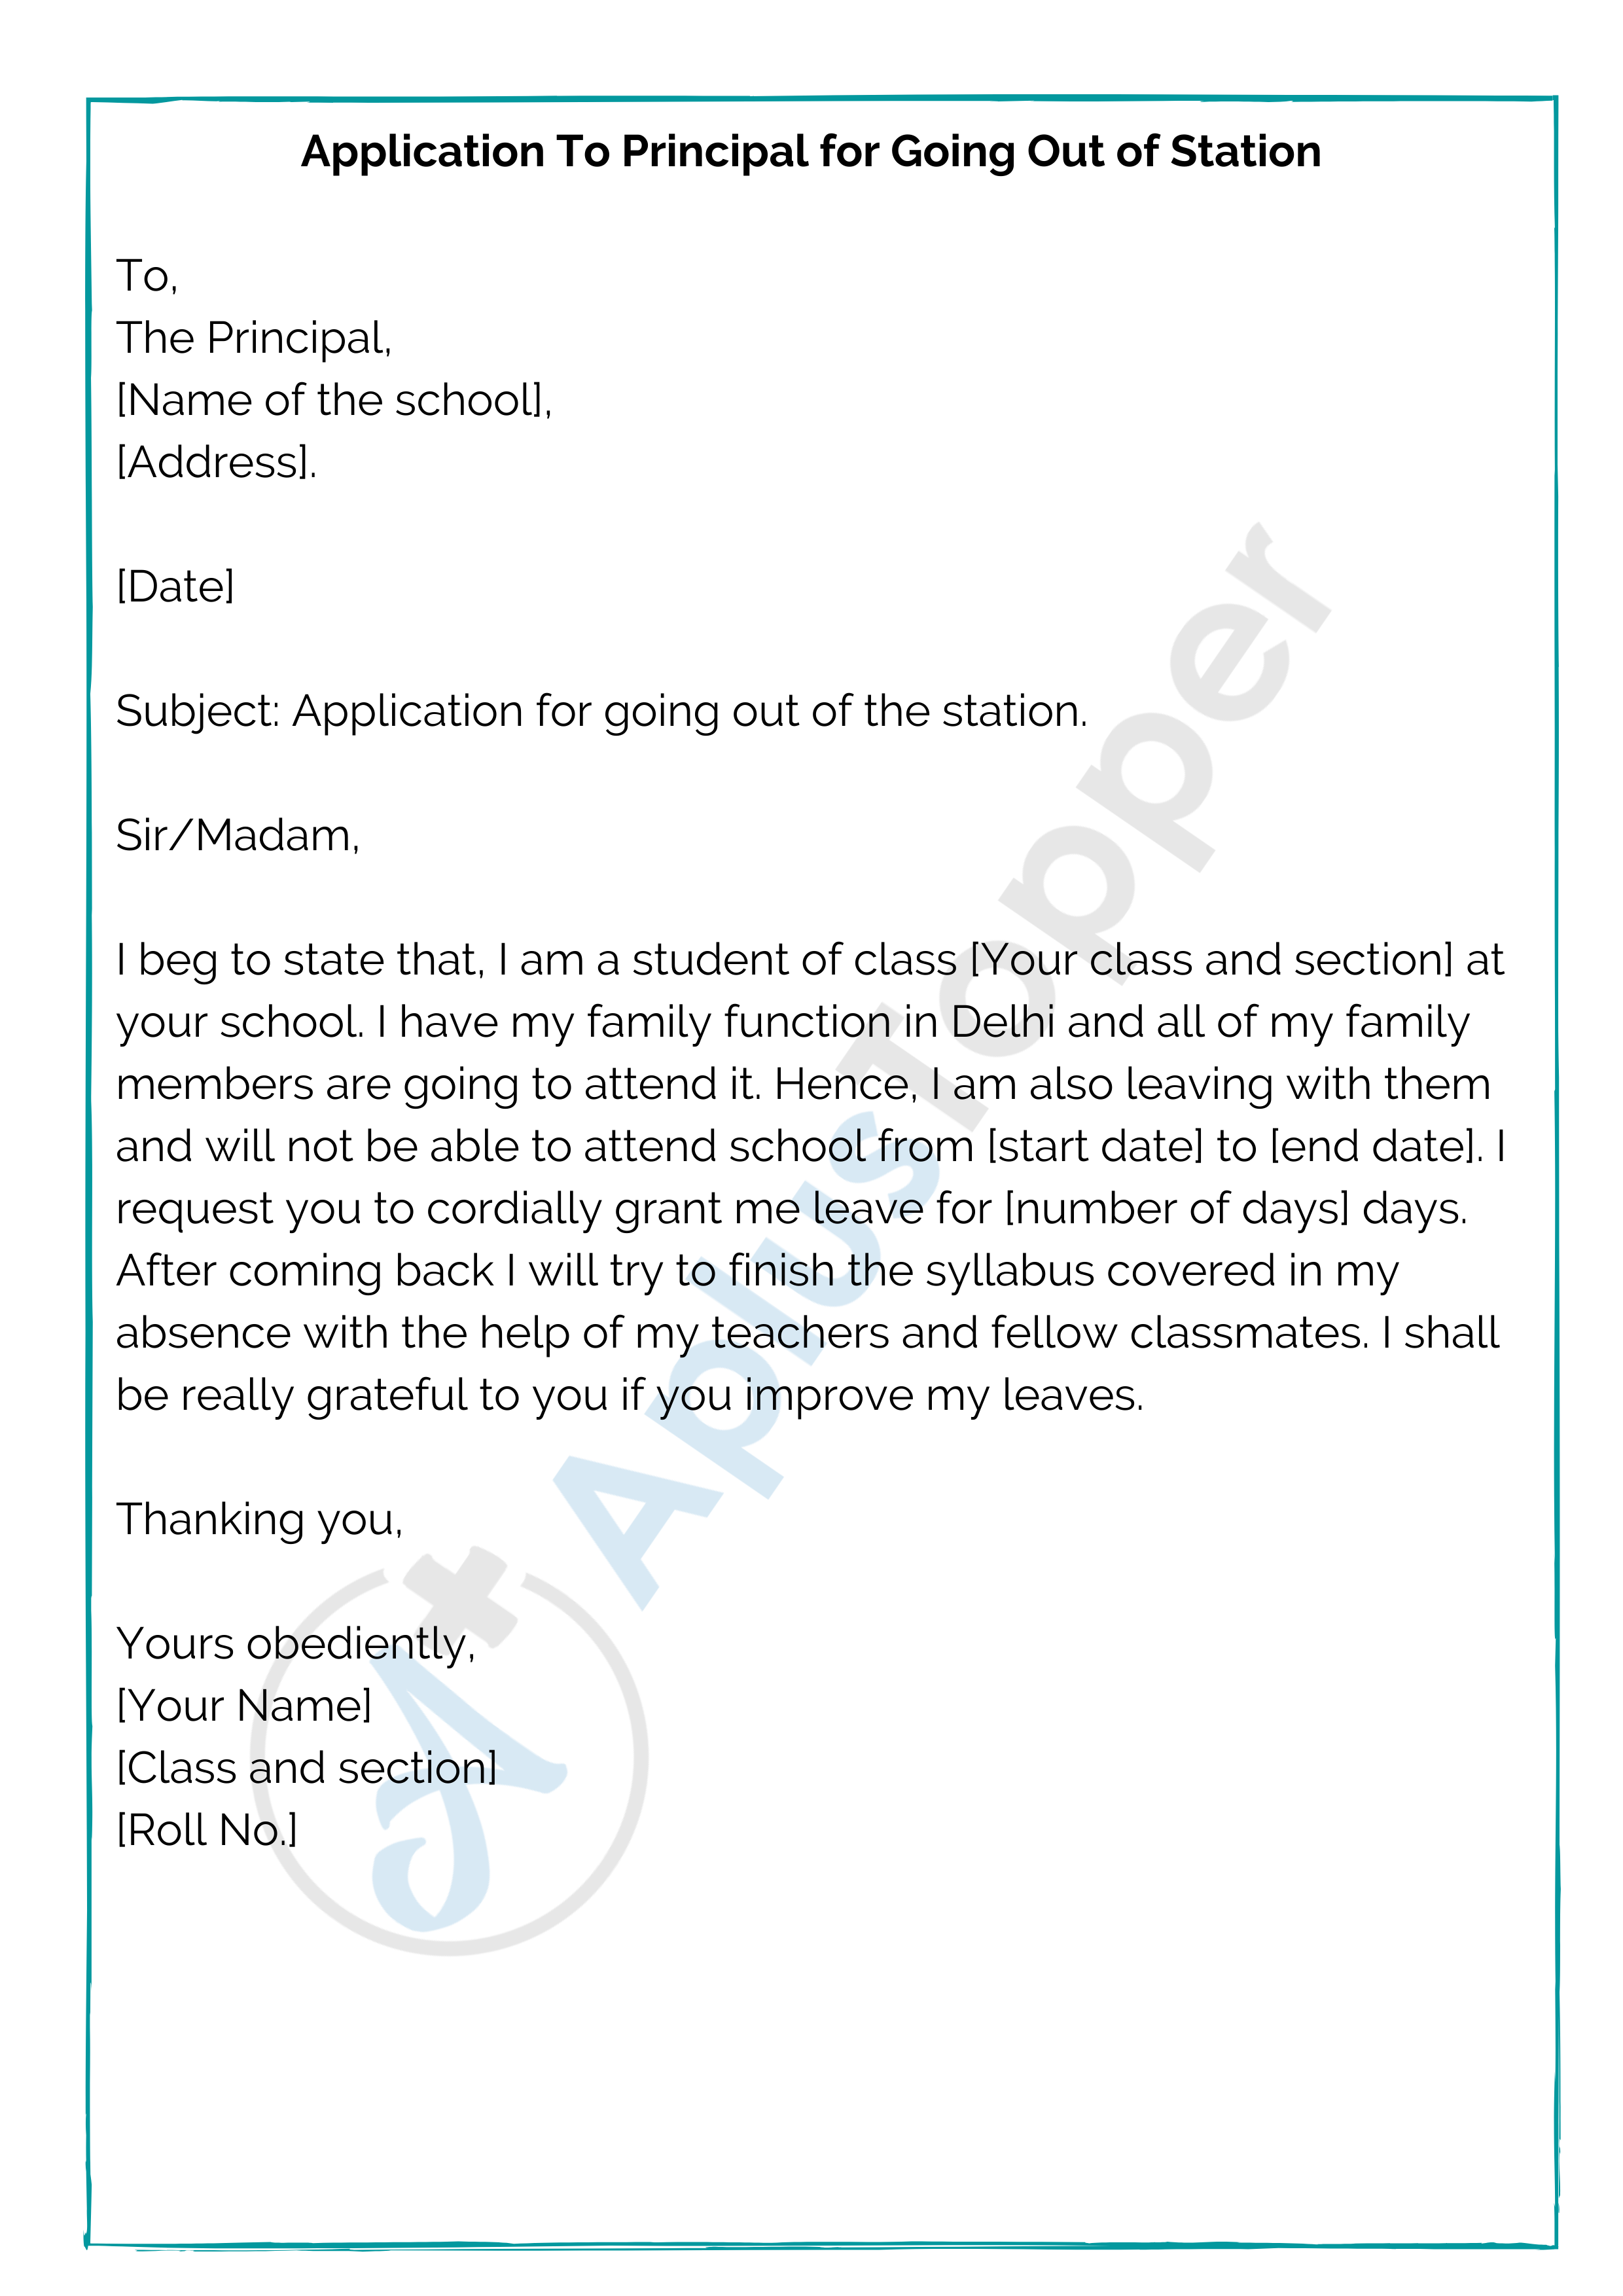 how to write application letter to college principal